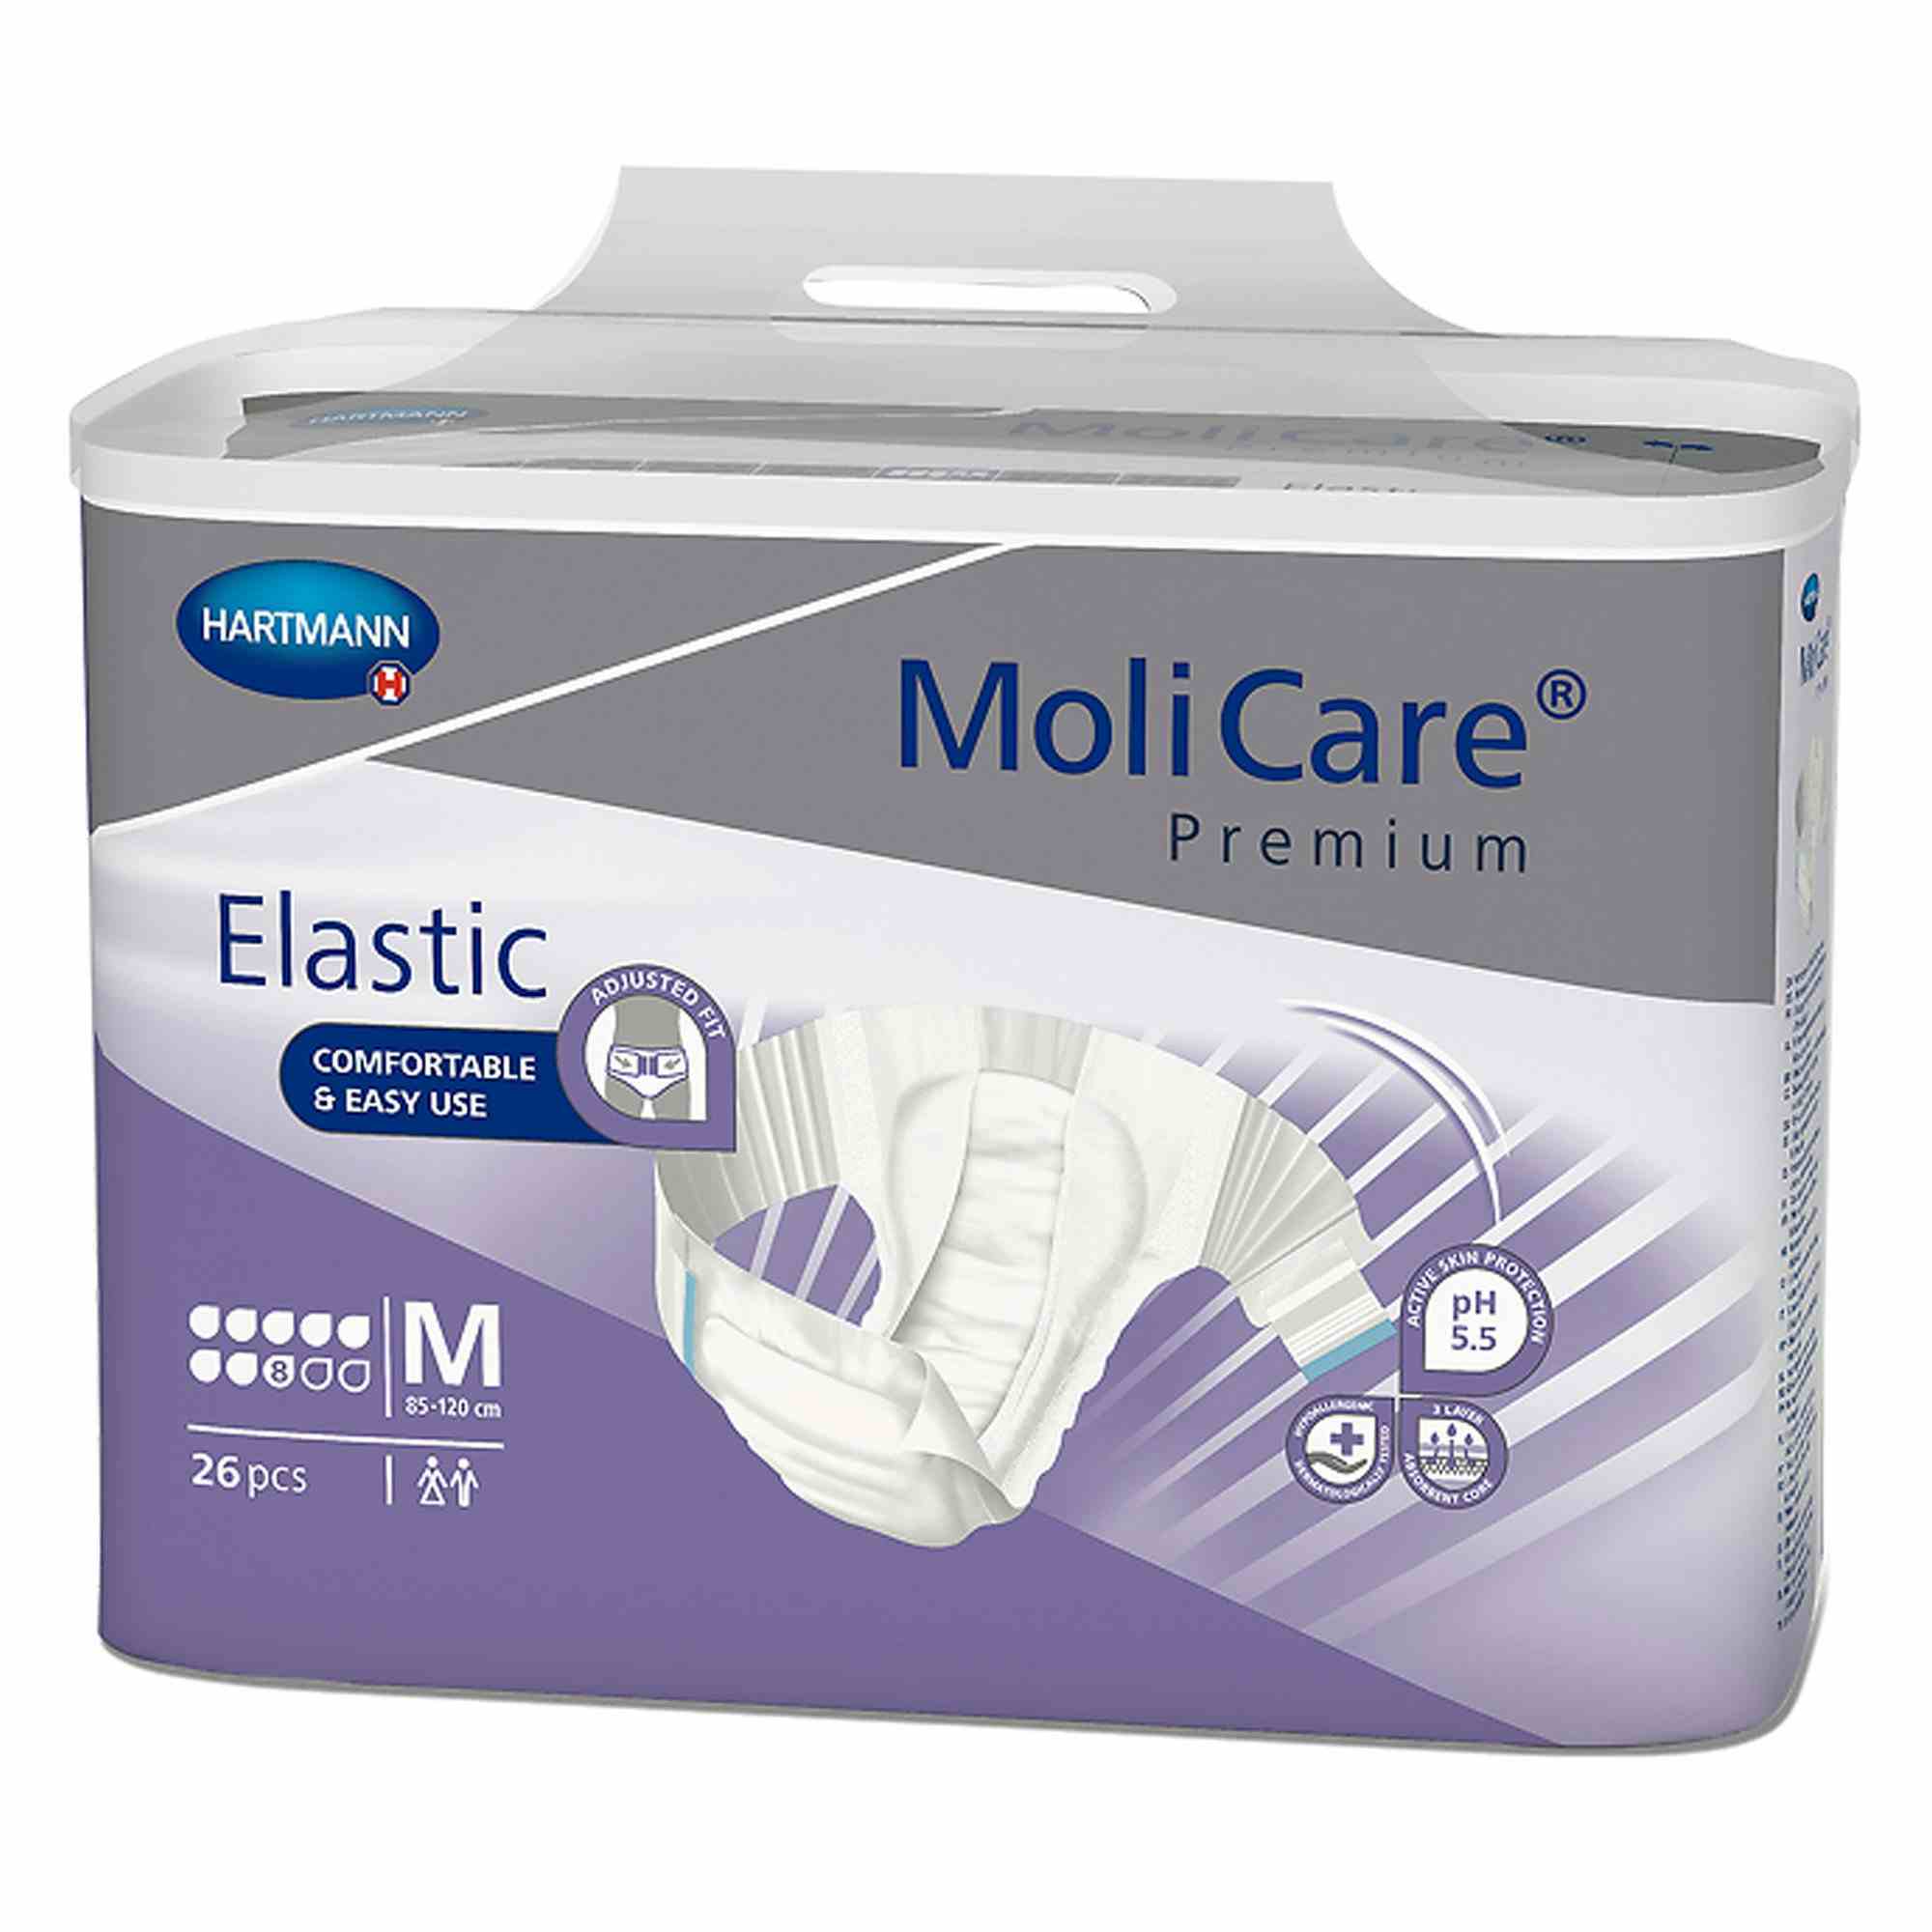 MoliCare Premium 8D Elastic Disposable Brief Adult Diapers with Tabs, Heavy Absorbency, 165472, Medium (33-47") - Case of 78